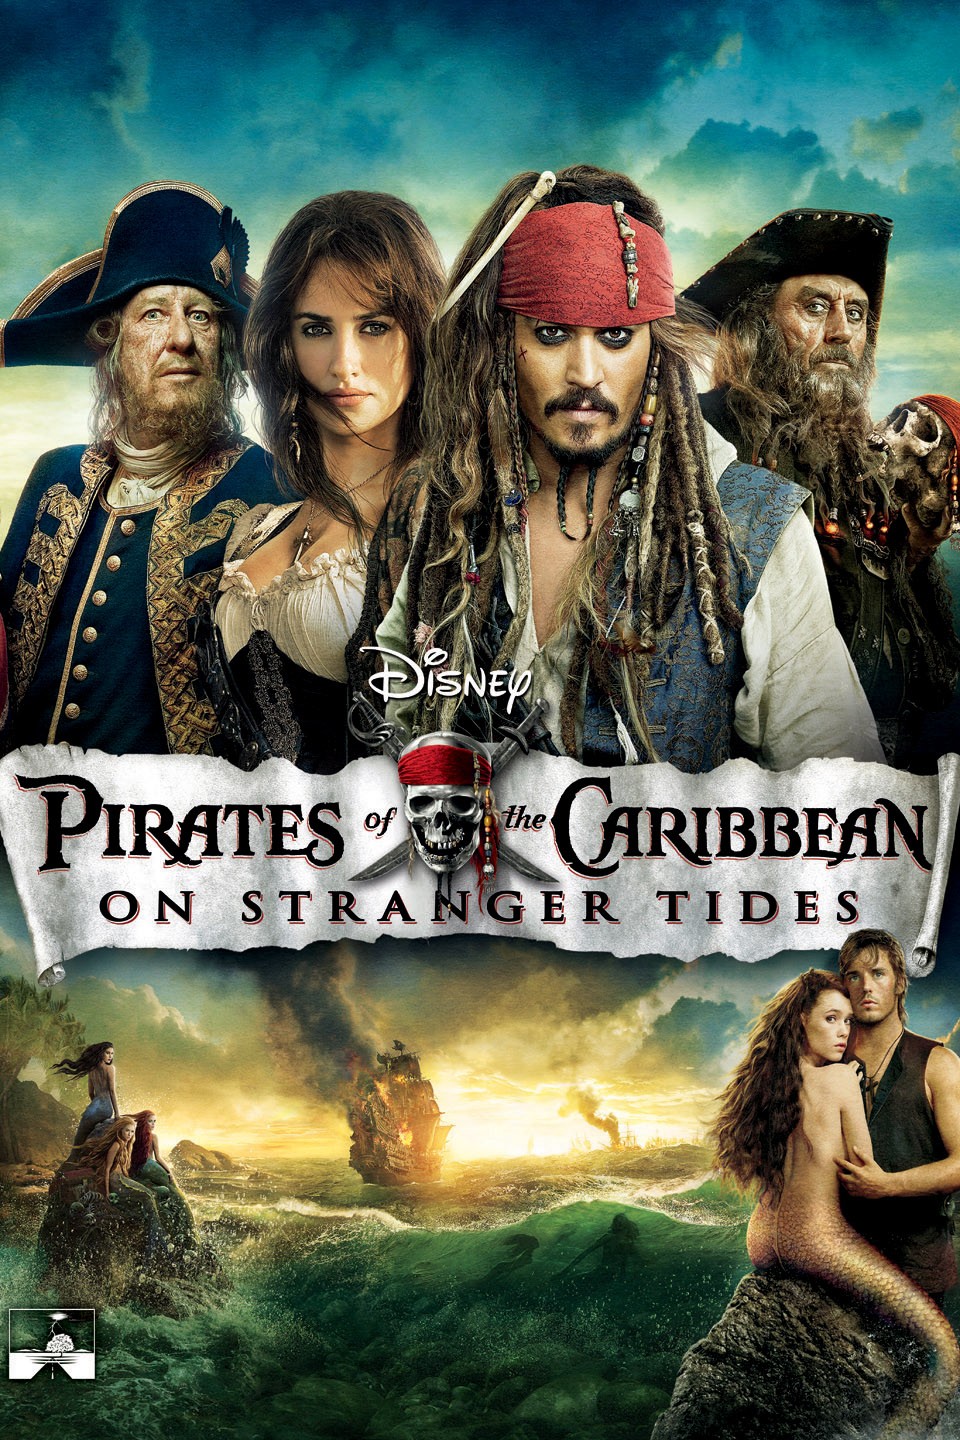 christine kosasih recommends Watch Pirates Of The Caribbean Online